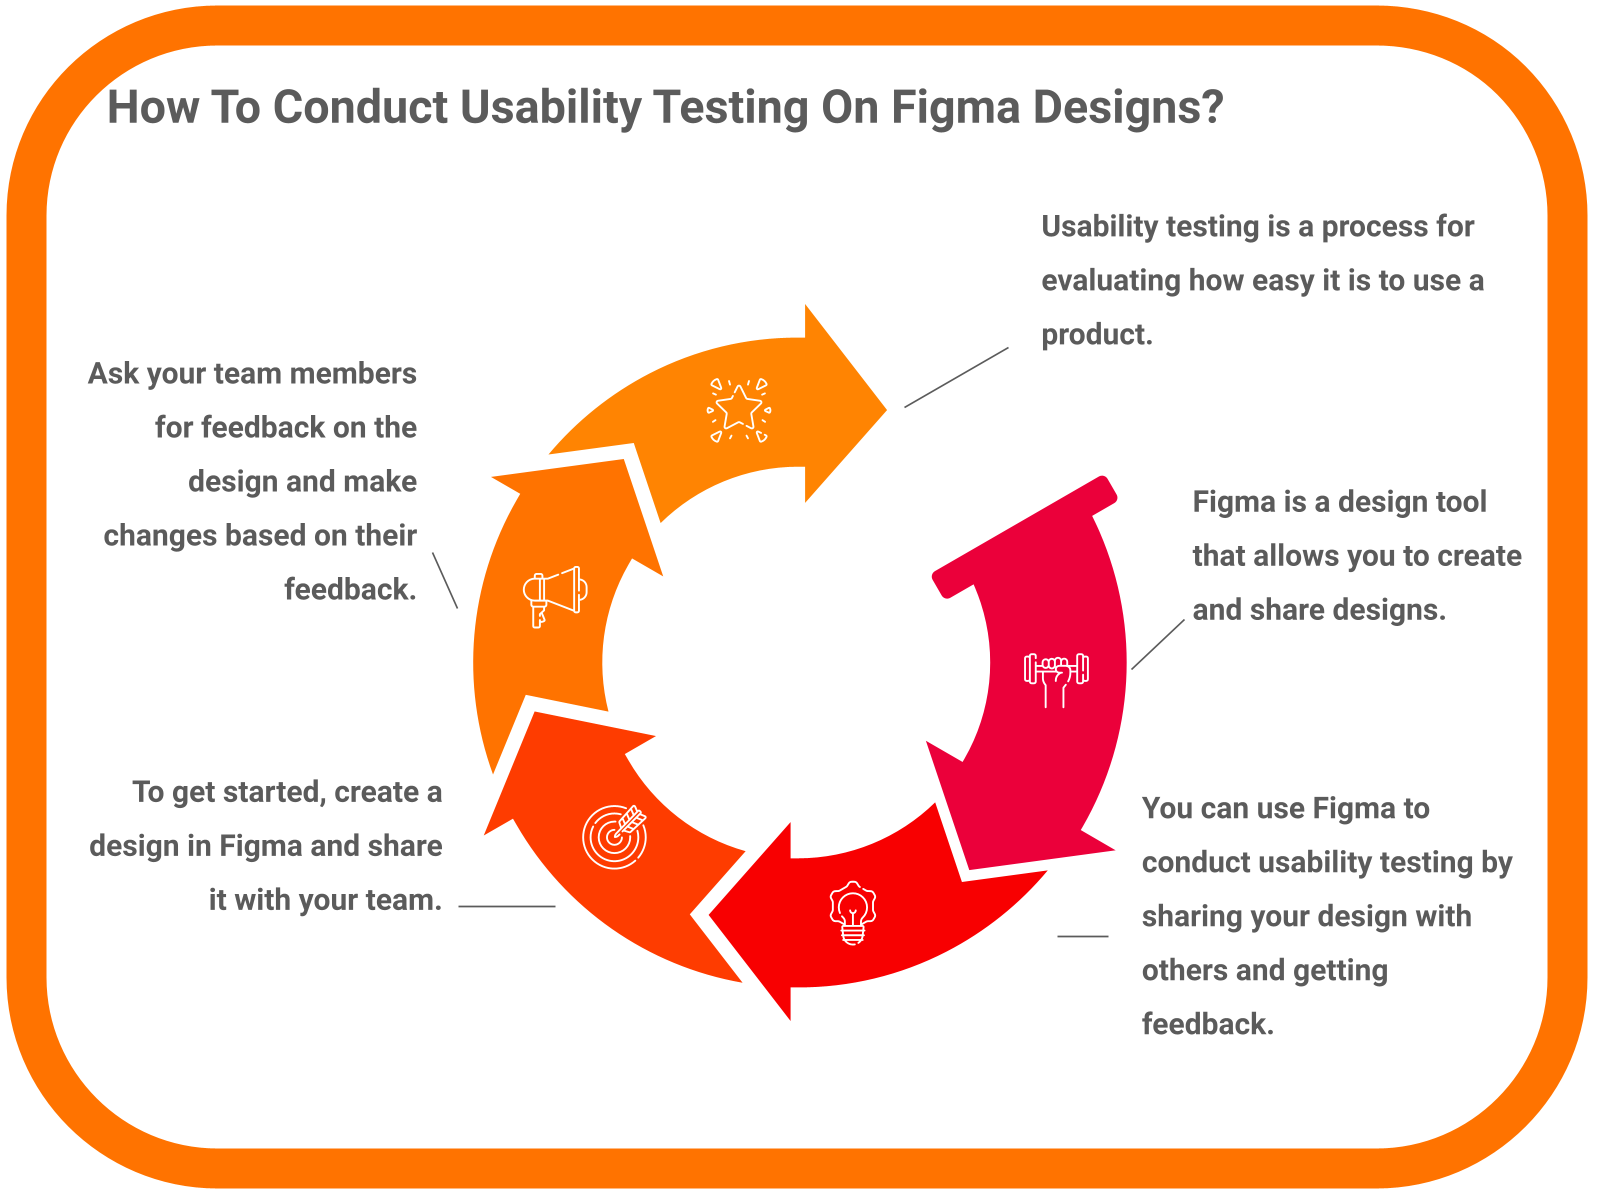 How To Conduct Usability Testing On Figma Designs?